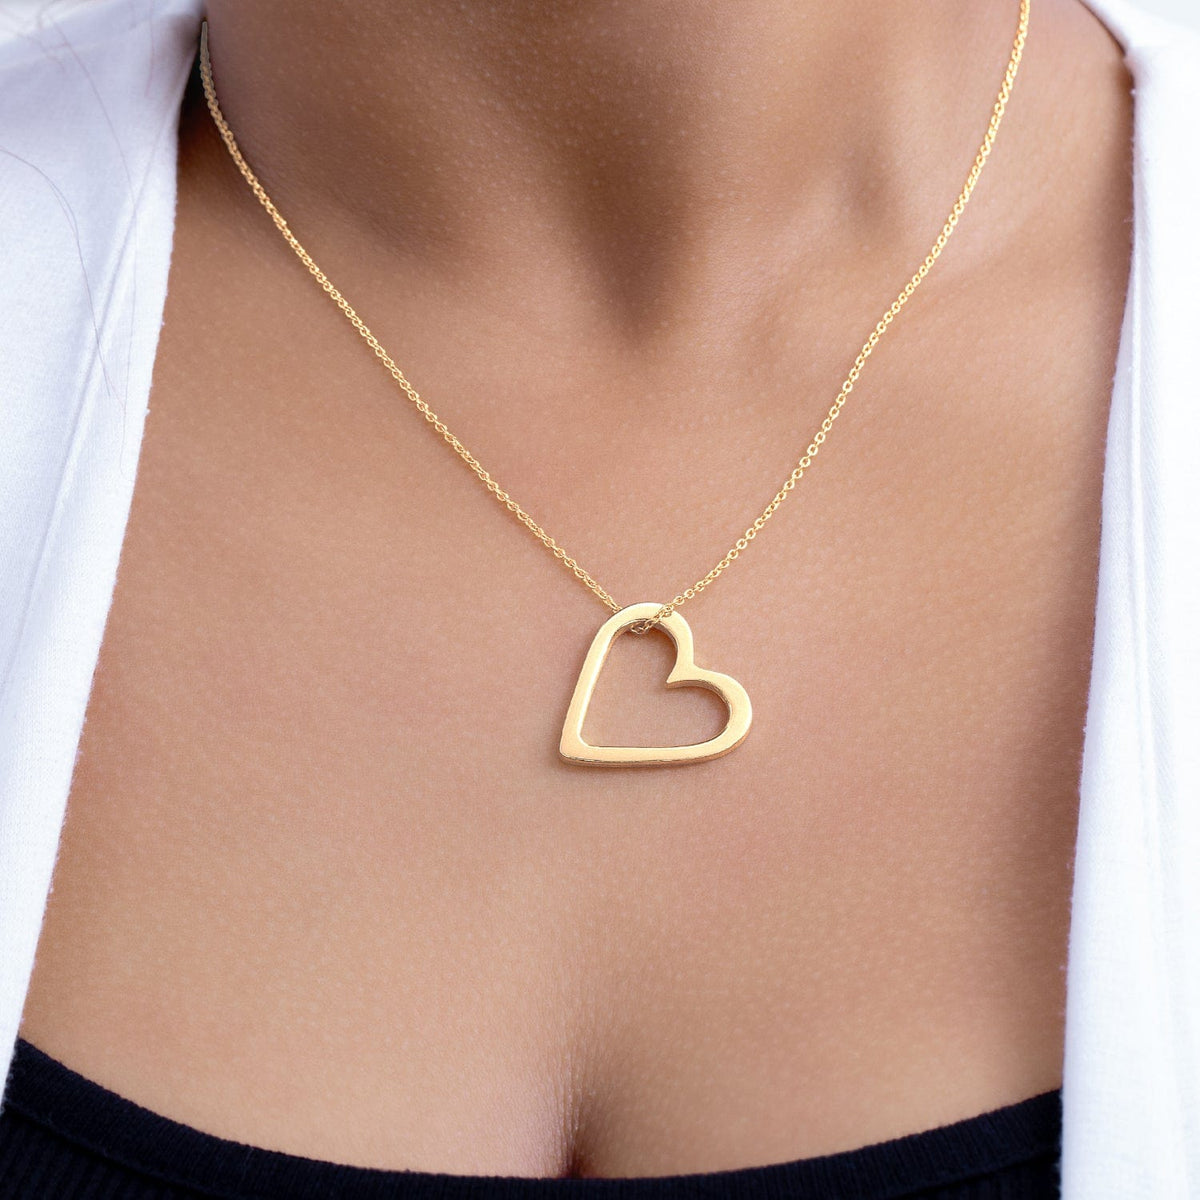 14k Gold over Sterling Silver Heart Silhouette with Inside Engraving